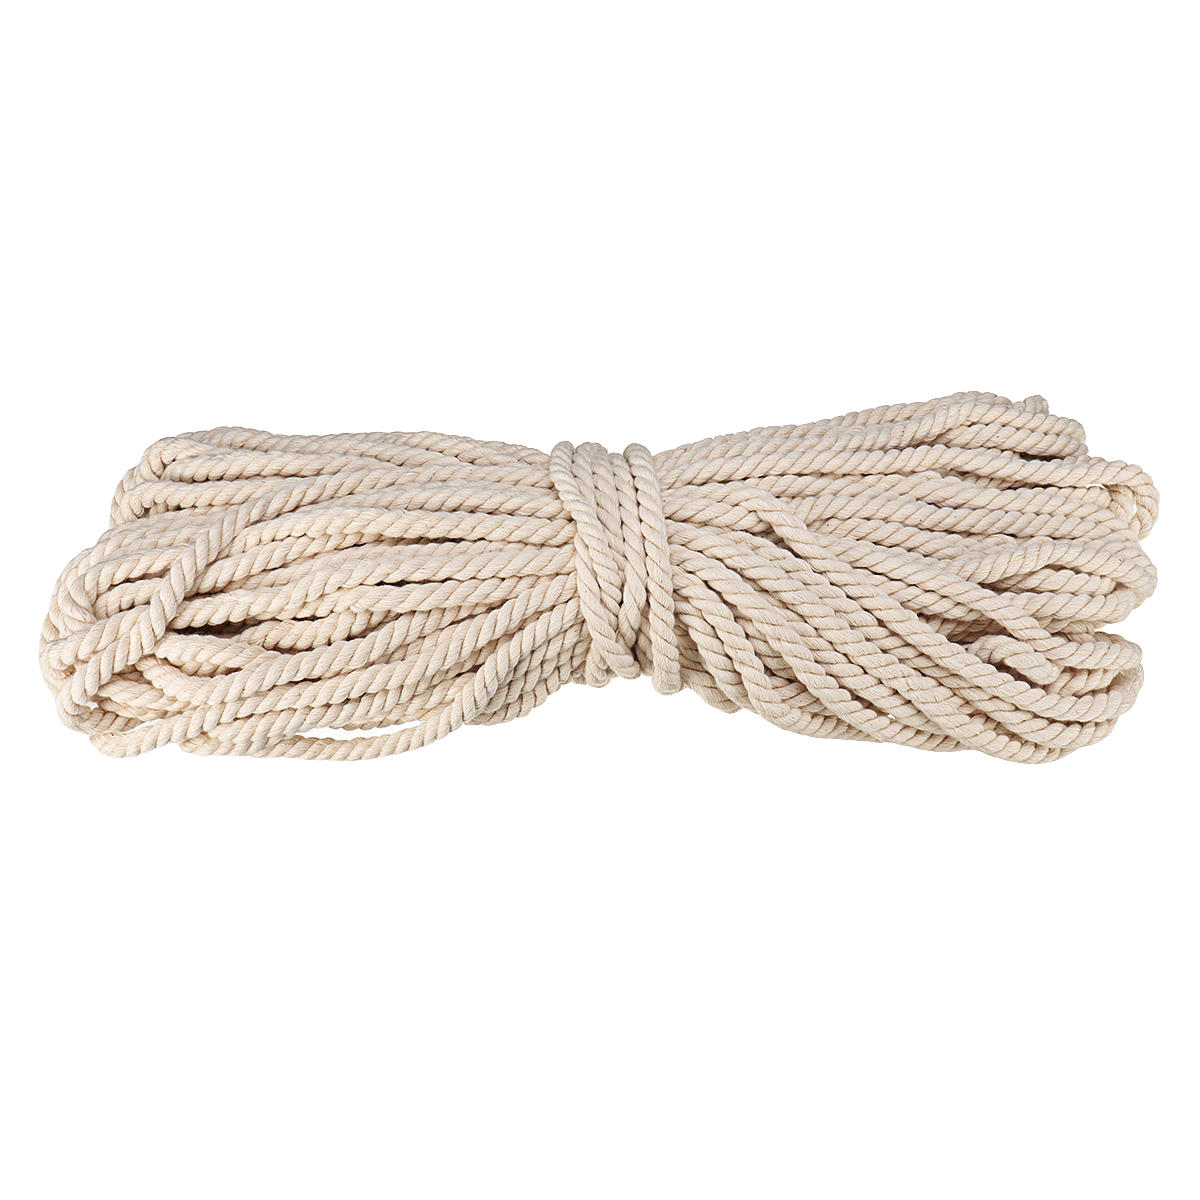 

Cotton Rope 8mm Natural Beige Twisted Cord DIY Craft Macrame Handmake String 45m Decorations